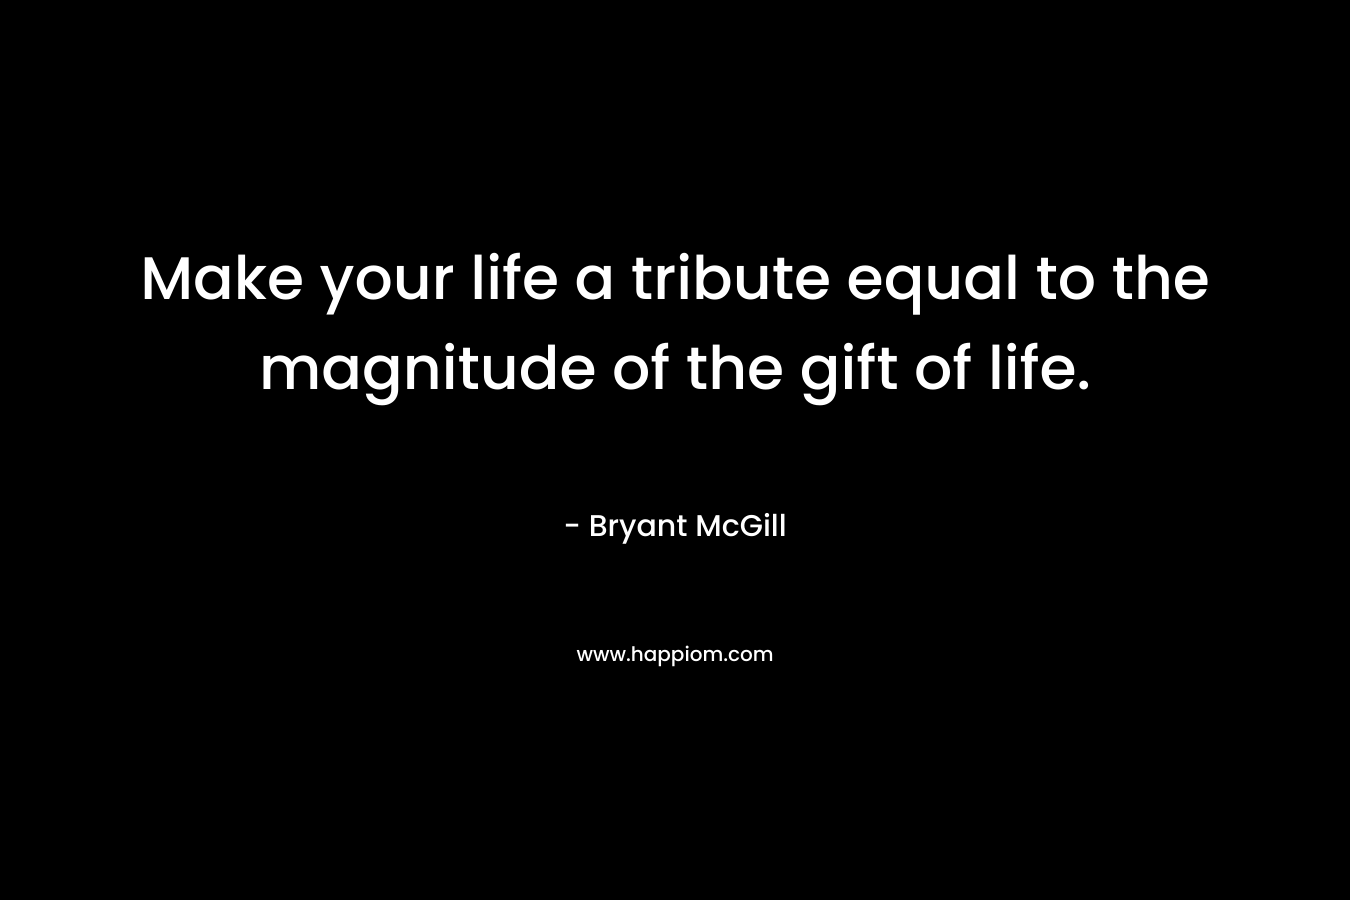 Make your life a tribute equal to the magnitude of the gift of life. – Bryant McGill